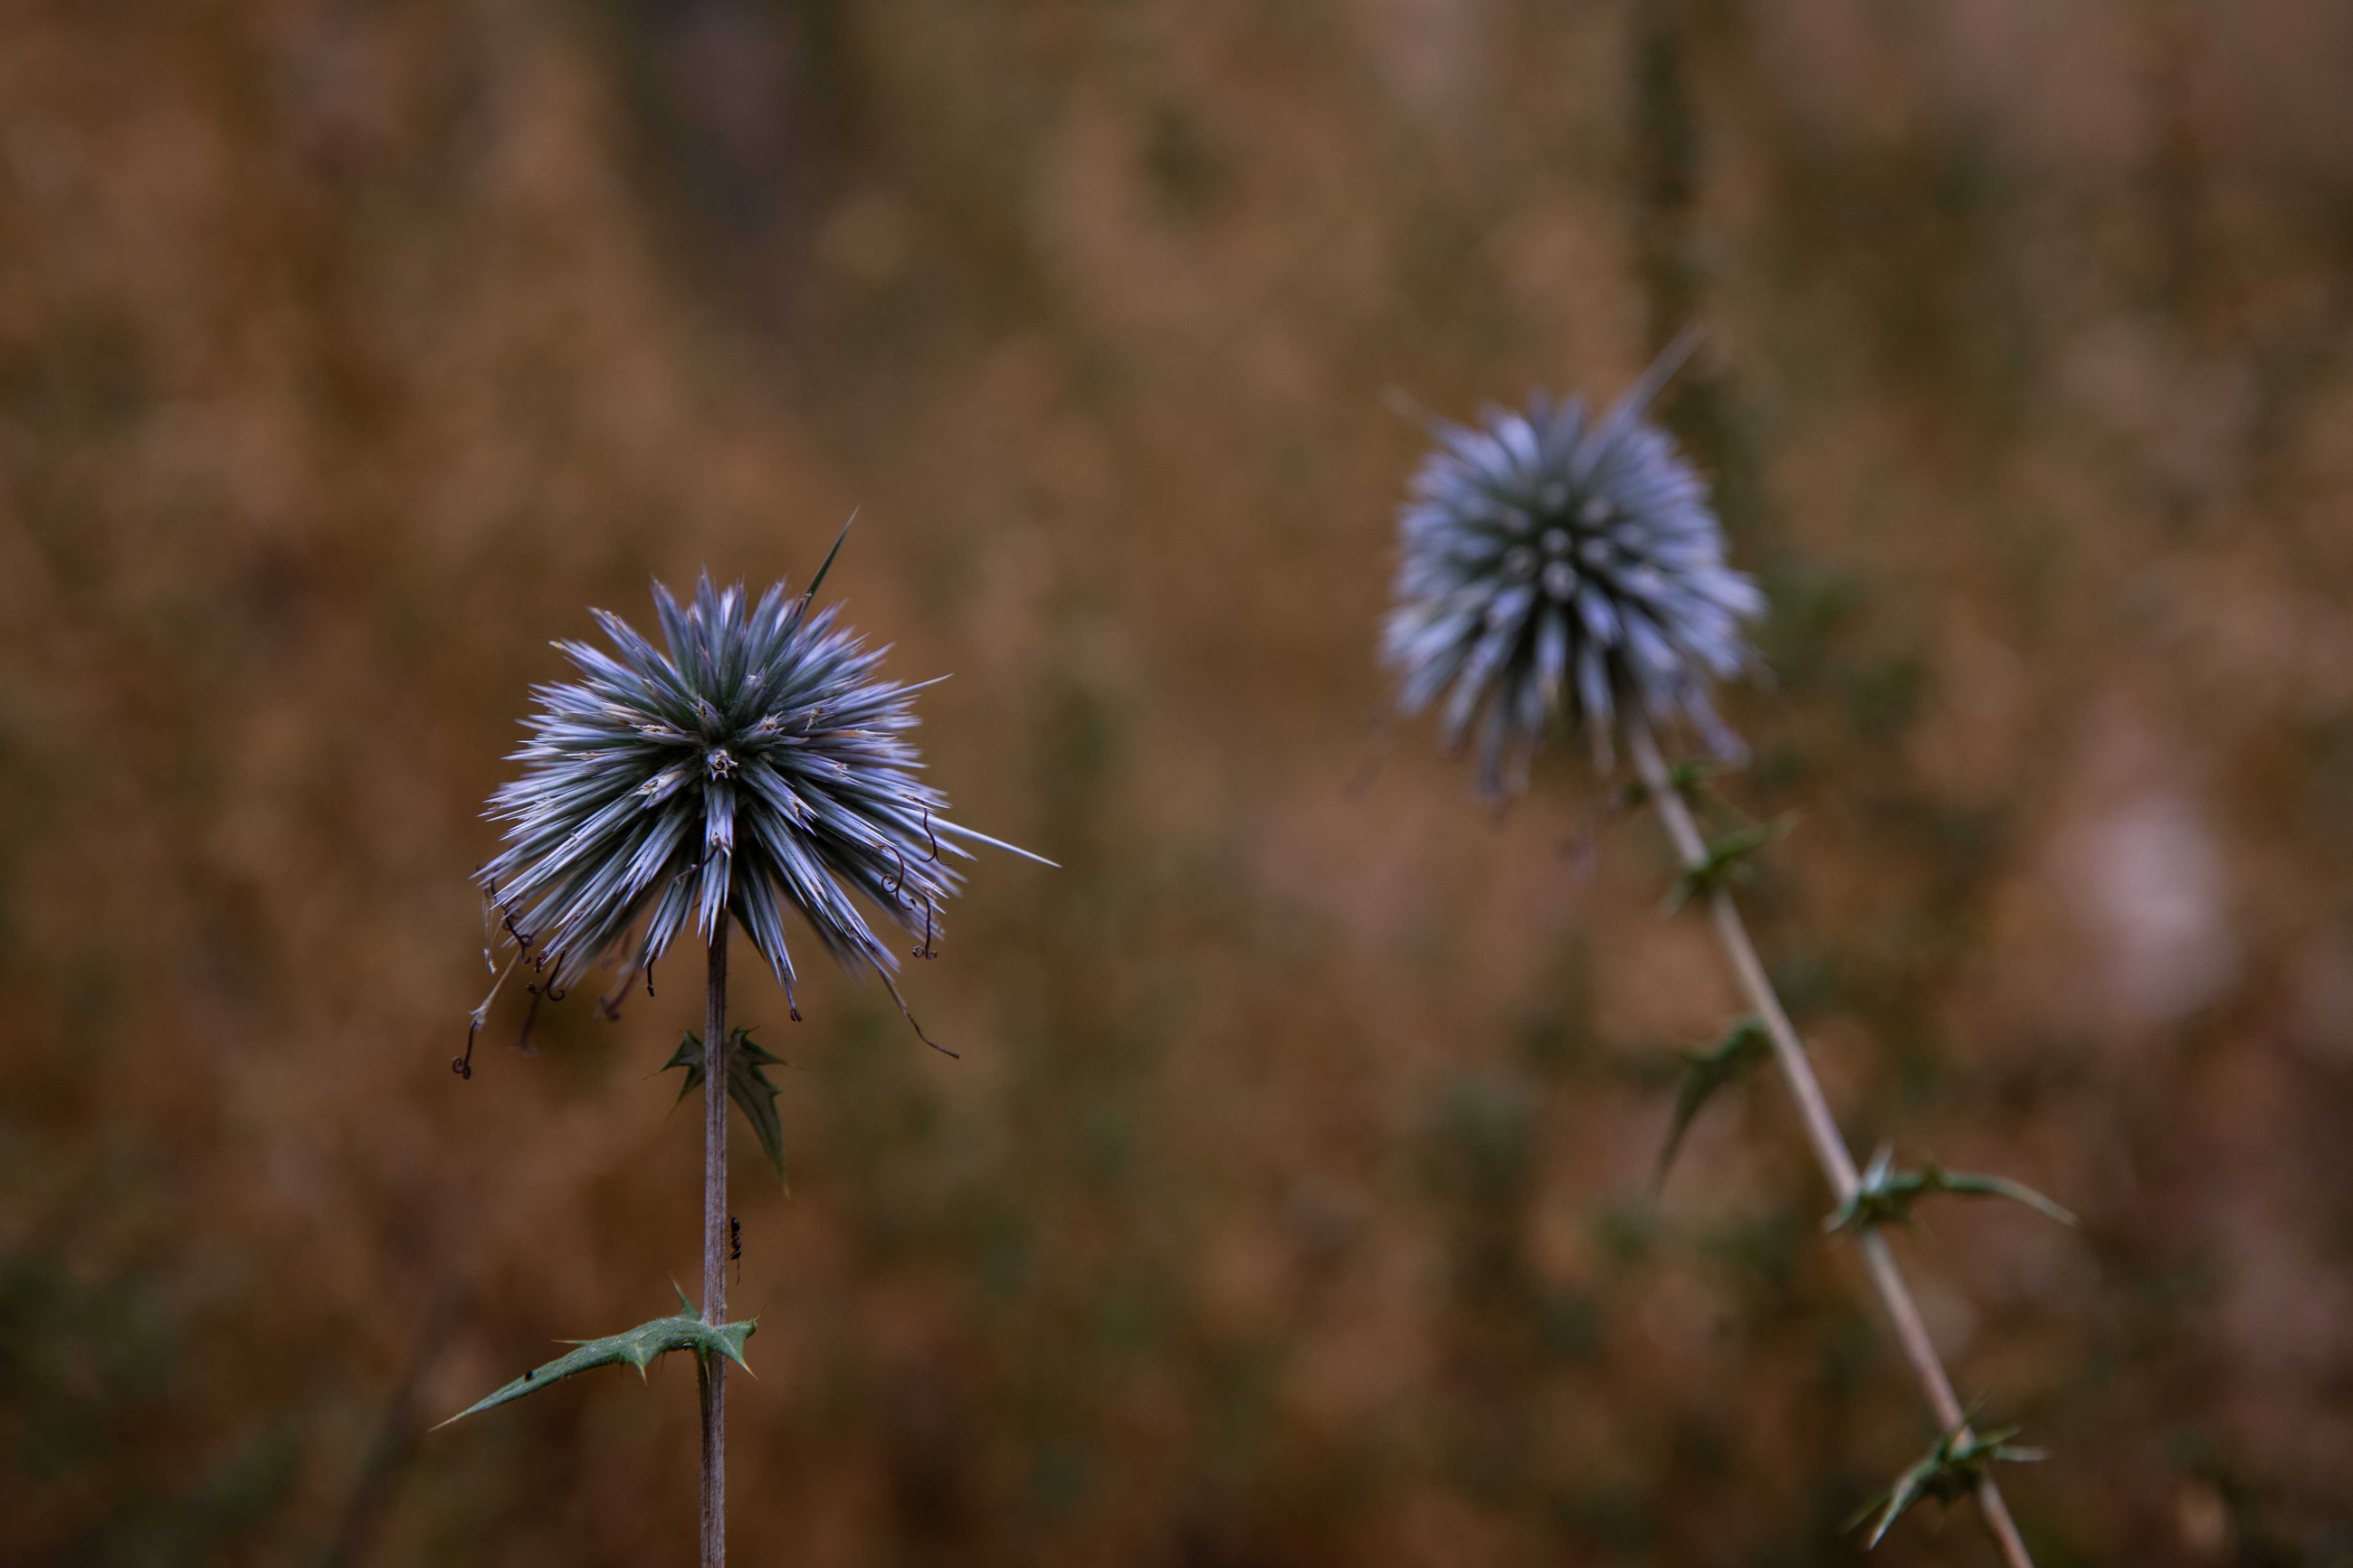 A close up of two globe thistles. They have long stems and purple-gray spiny foliage.